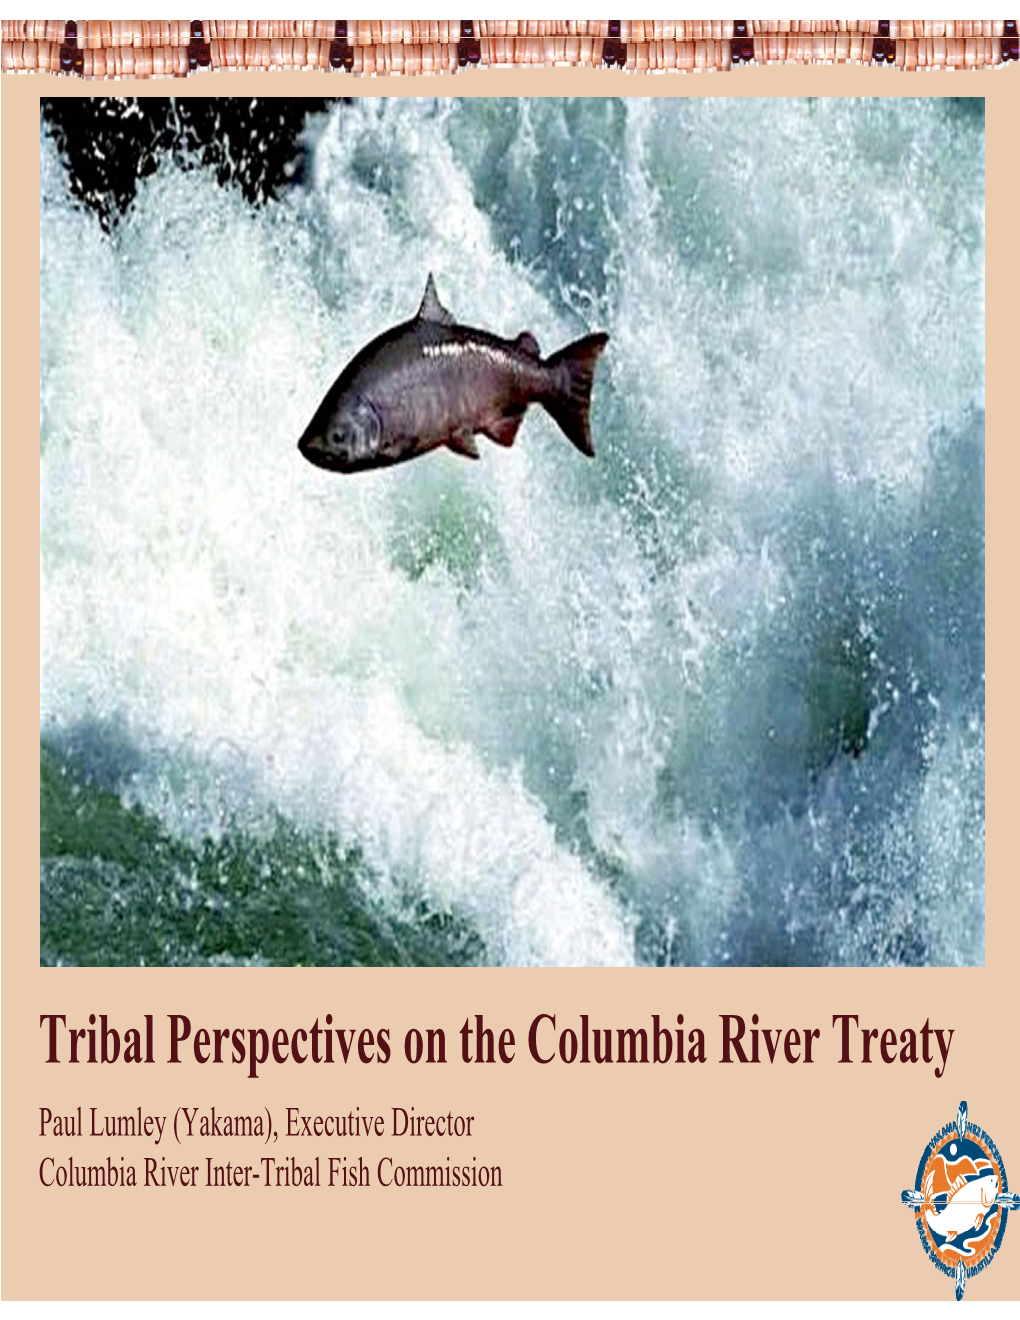 Tribal Perspectives on the Columbia River Treaty Paul Lumley (Yakama), Executive Director Columbia River Inter-Tribal Fish Commission 1 First Foods Salmon